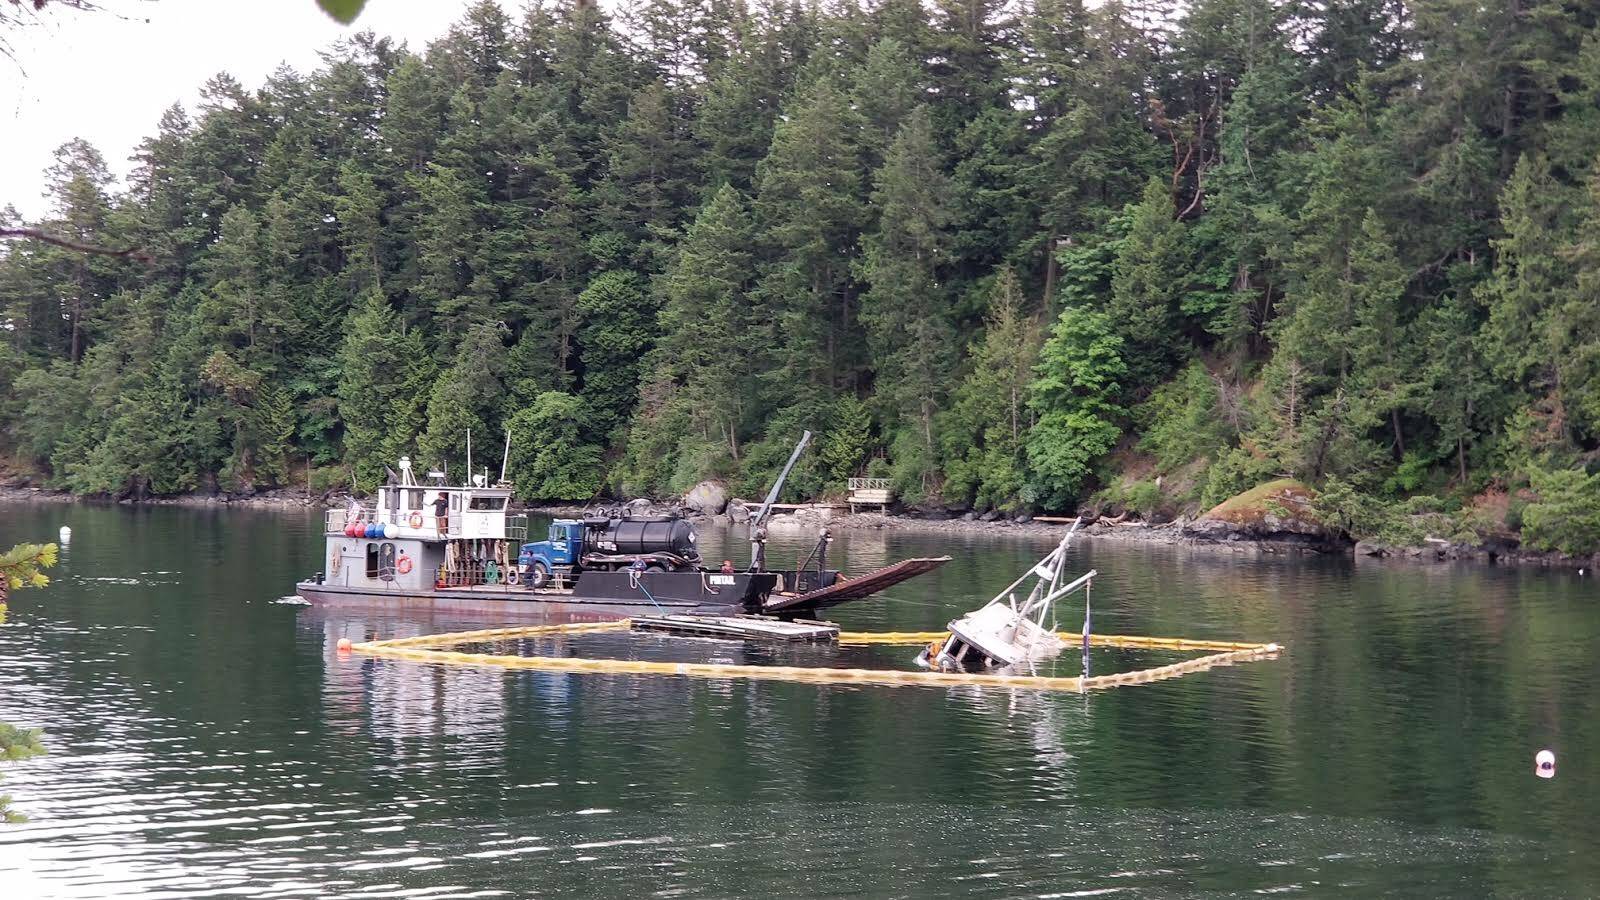 Multi-agency response to Judd Cove boat fire